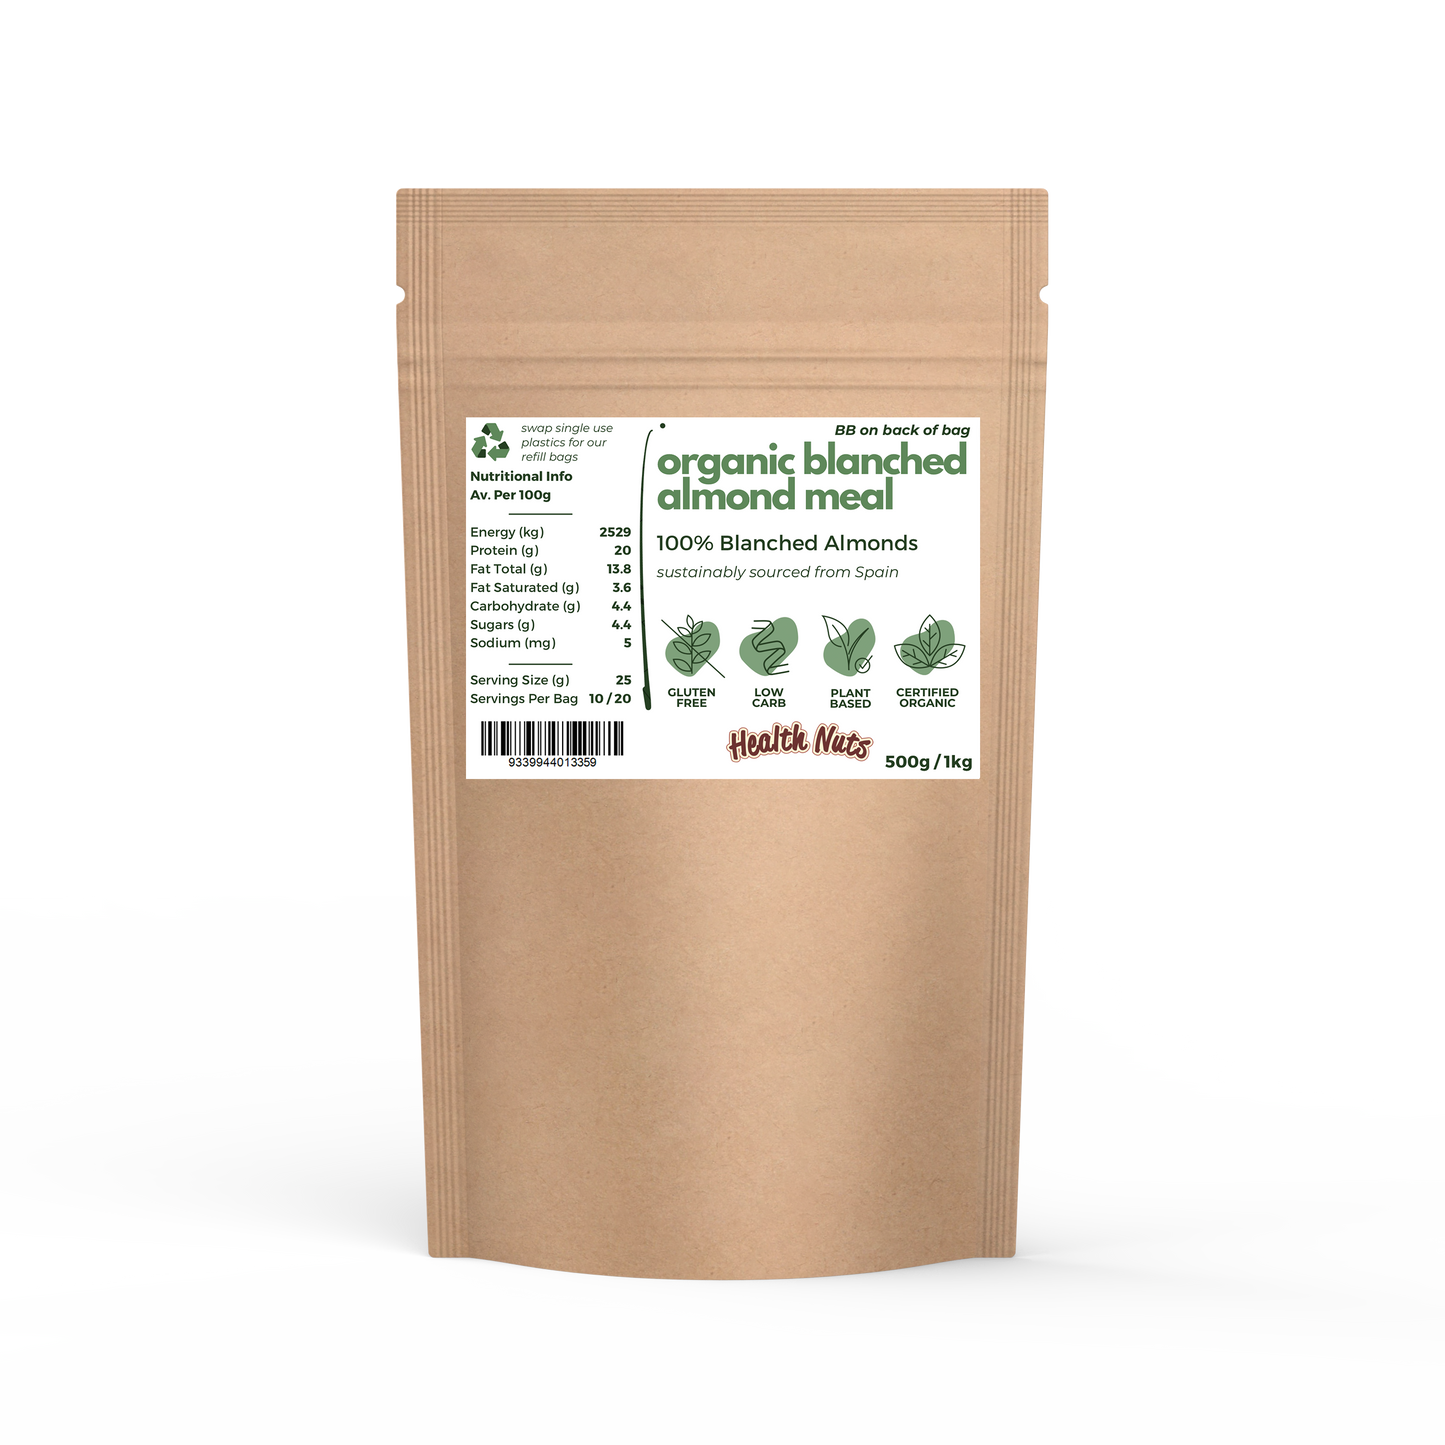 Health Nuts Organic Blanched Almond Meal 500g